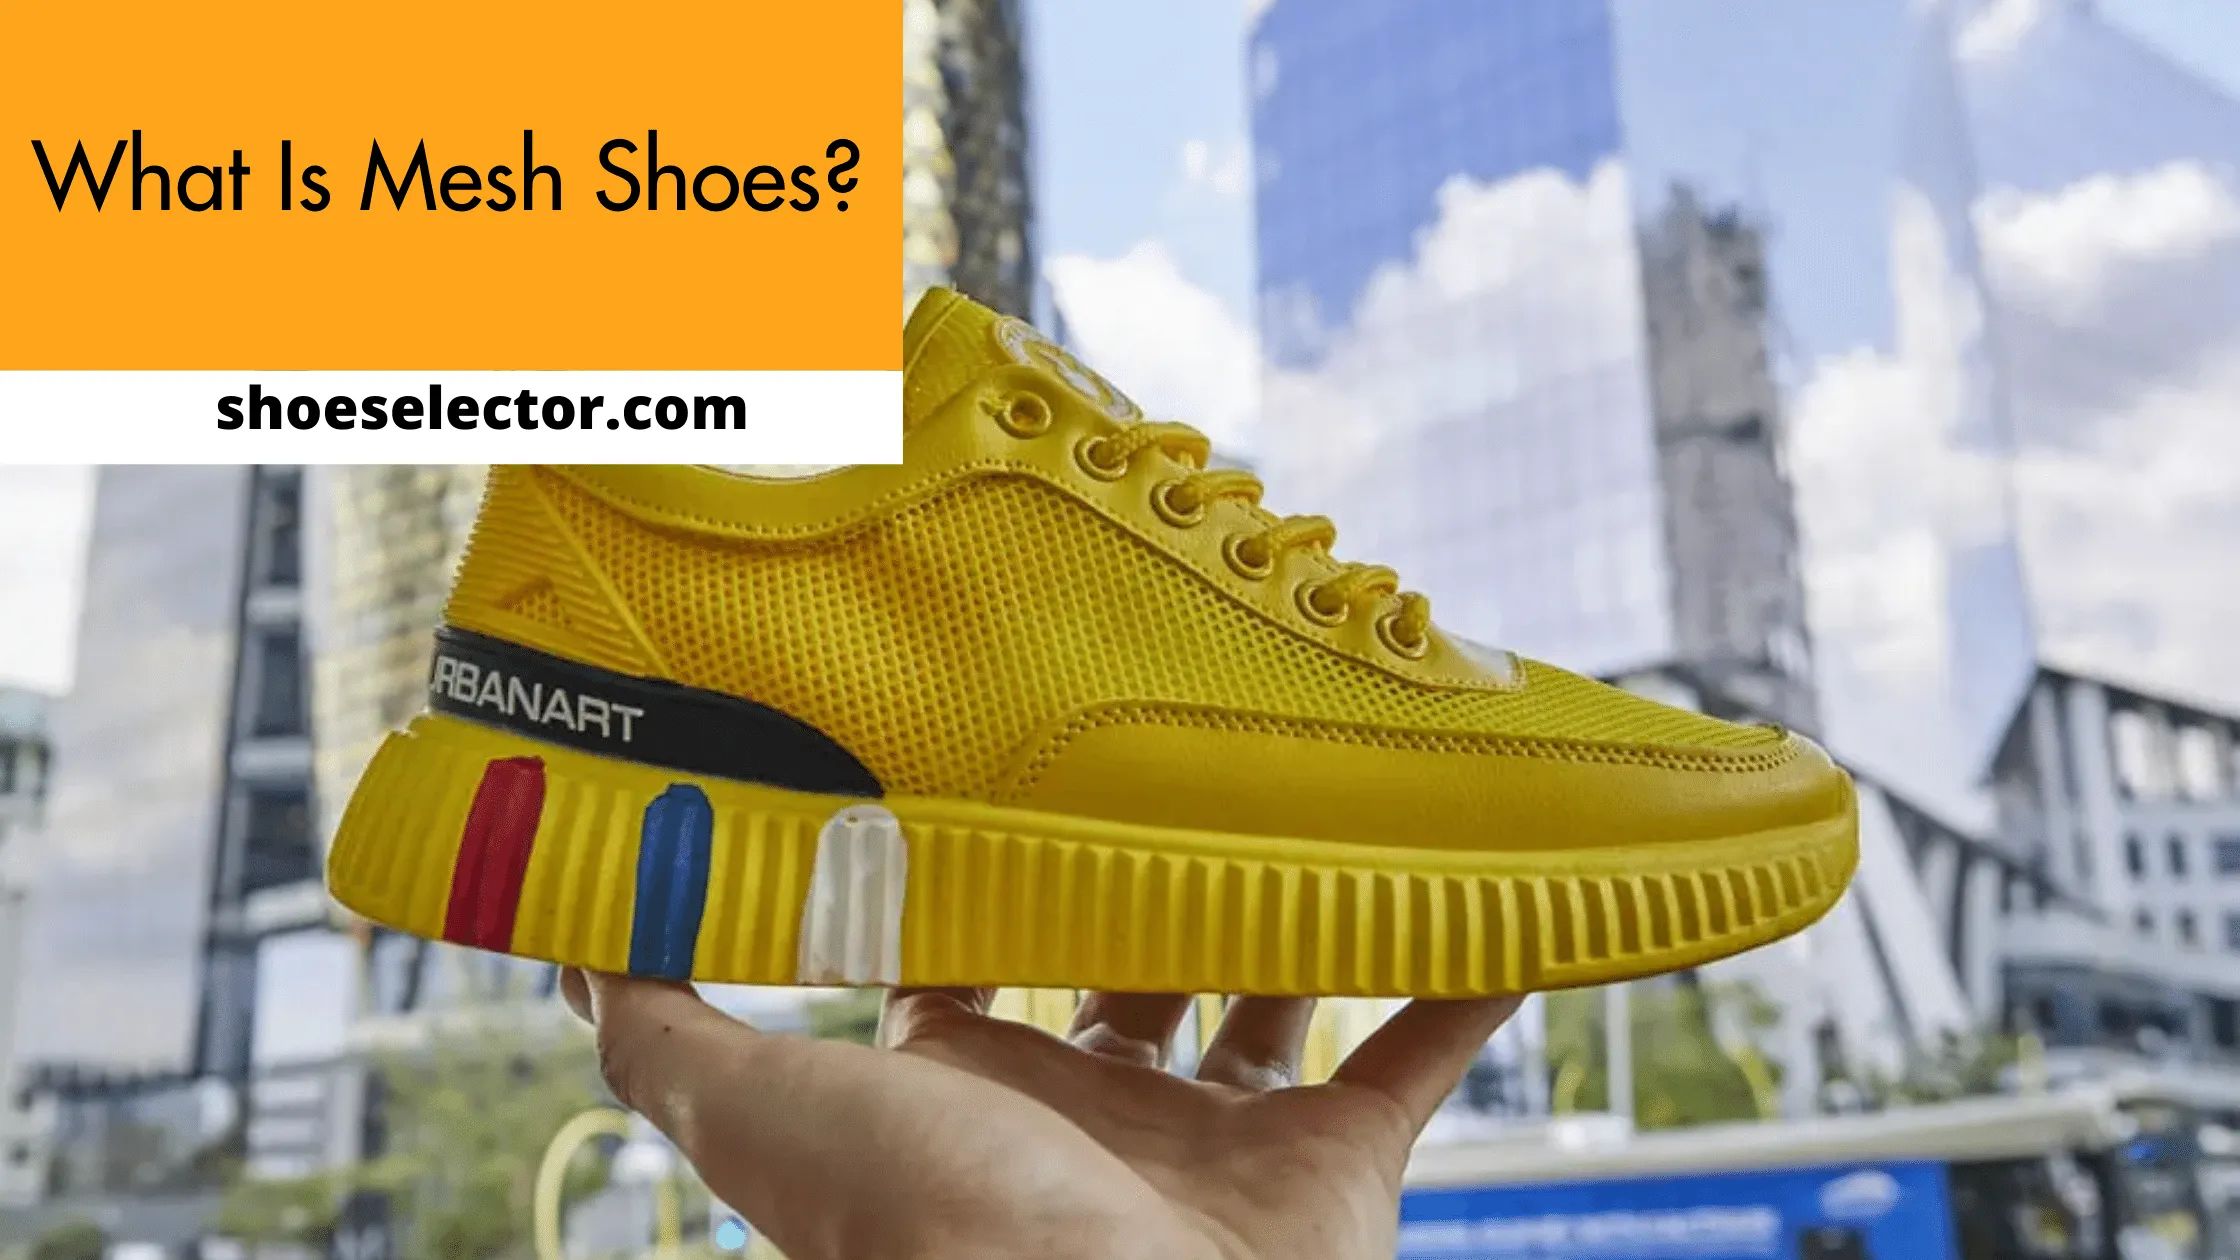 What Is Mesh Shoes? - Complete Guide